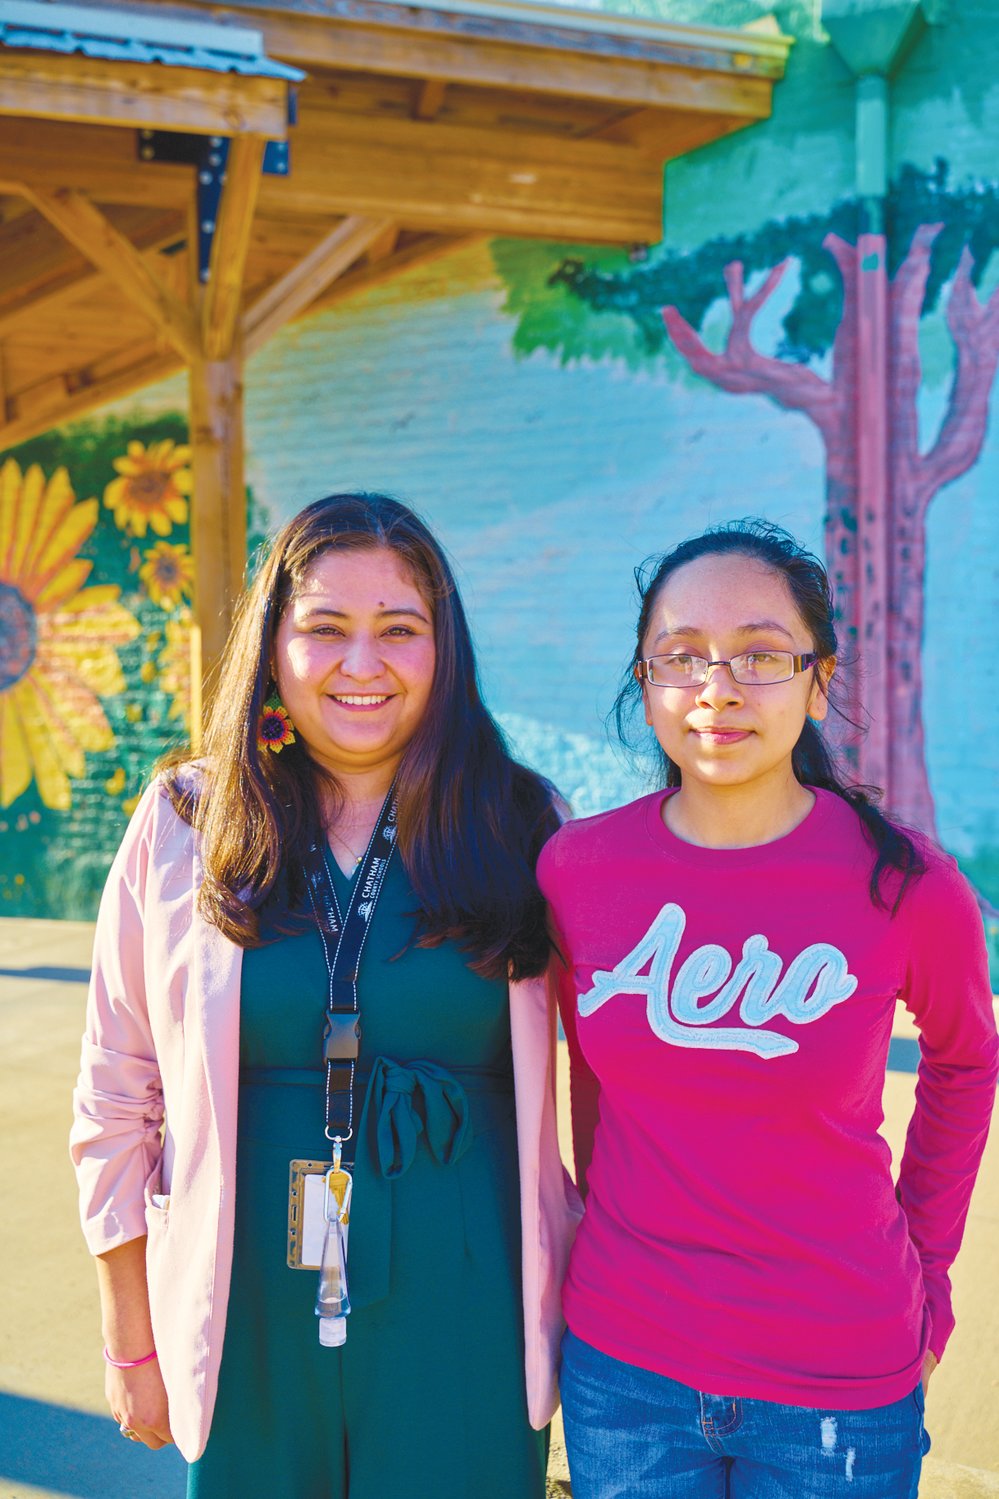 J-M senior Evelin Muñoz Tebalan (right) with the Hispanic Liaison's Selina Lopez, youth program director of Orgullo Latinx Pride. 'I'm also really excited to see where she goes, ‘cause she's just gonna be soaring,' Lopez said of Muñoz Tebalan.